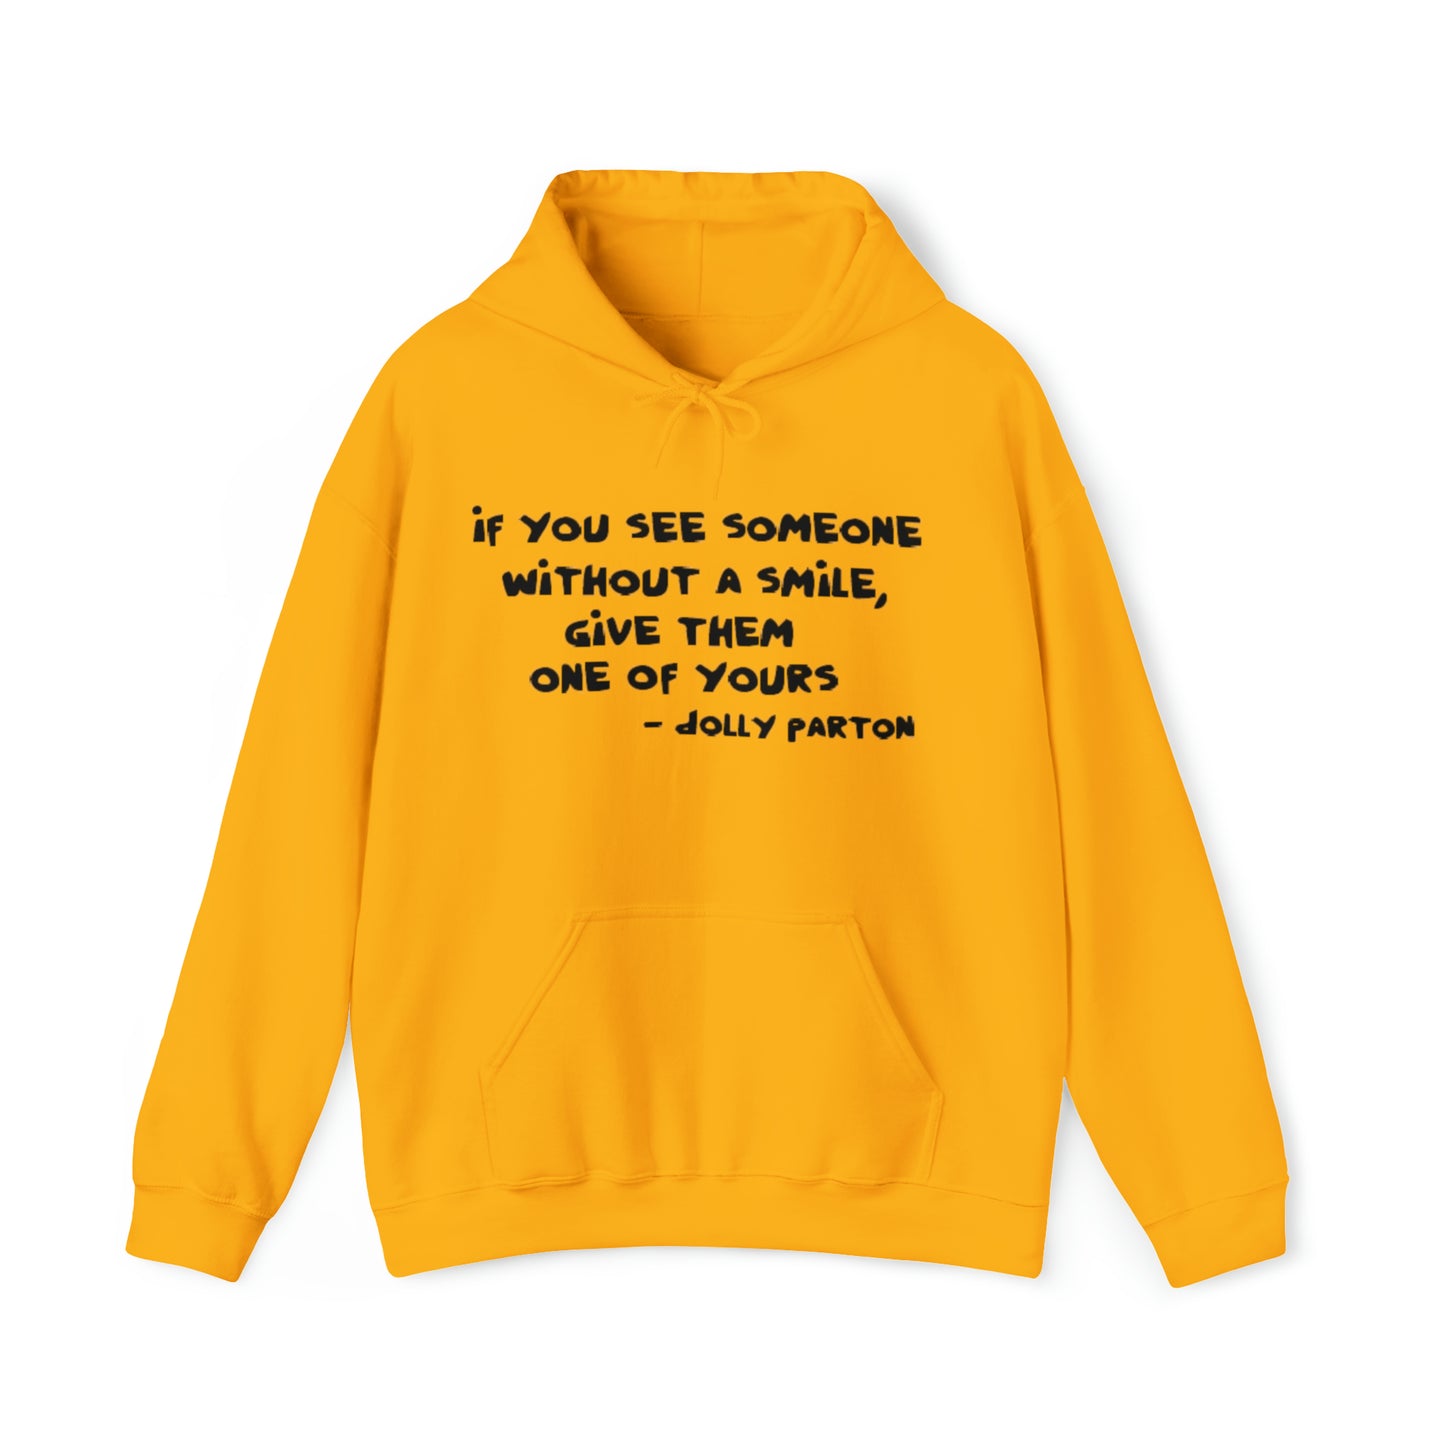 Give Them One of Yours - Unisex Heavy Blend™ Hooded Sweatshirt